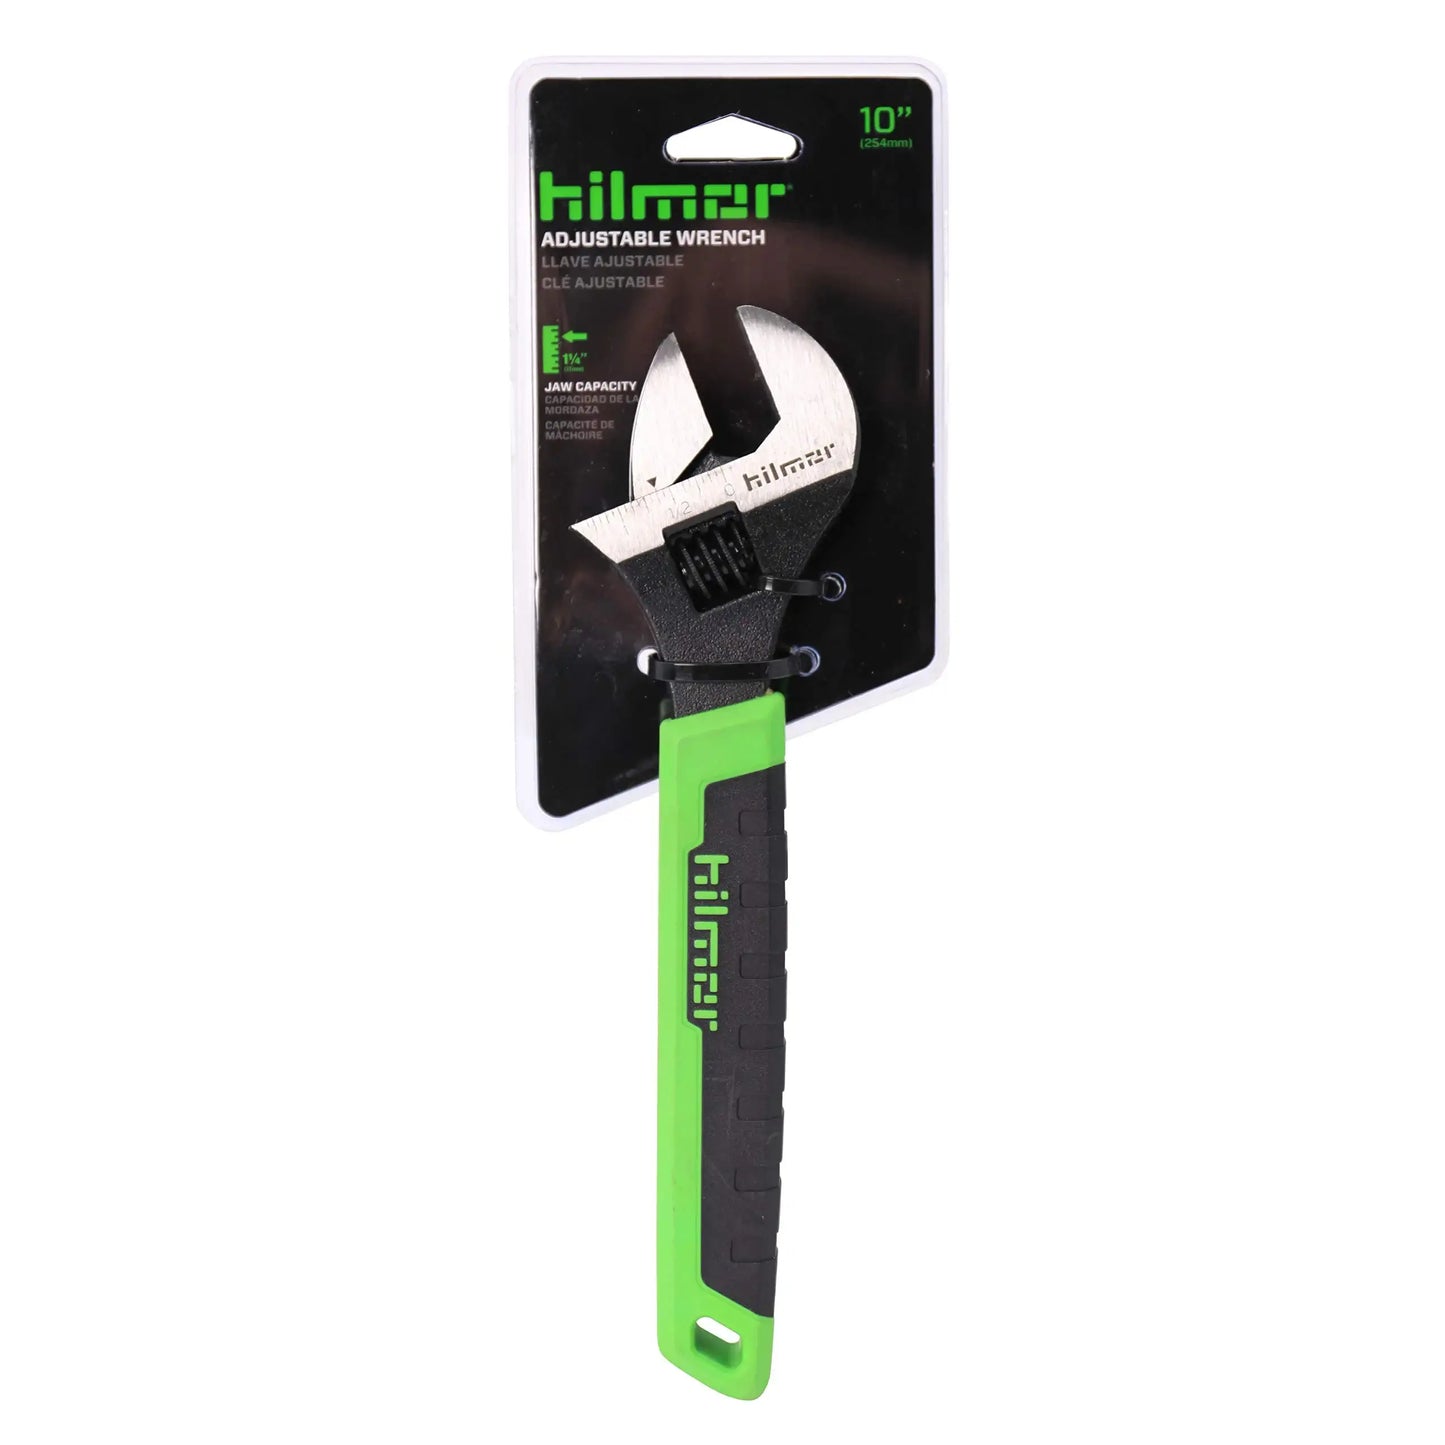 Hilmor 10 Adjustable Crescent Wrench with Rubber Handle Grip, Black & Green, AW10 1885421 Seventh